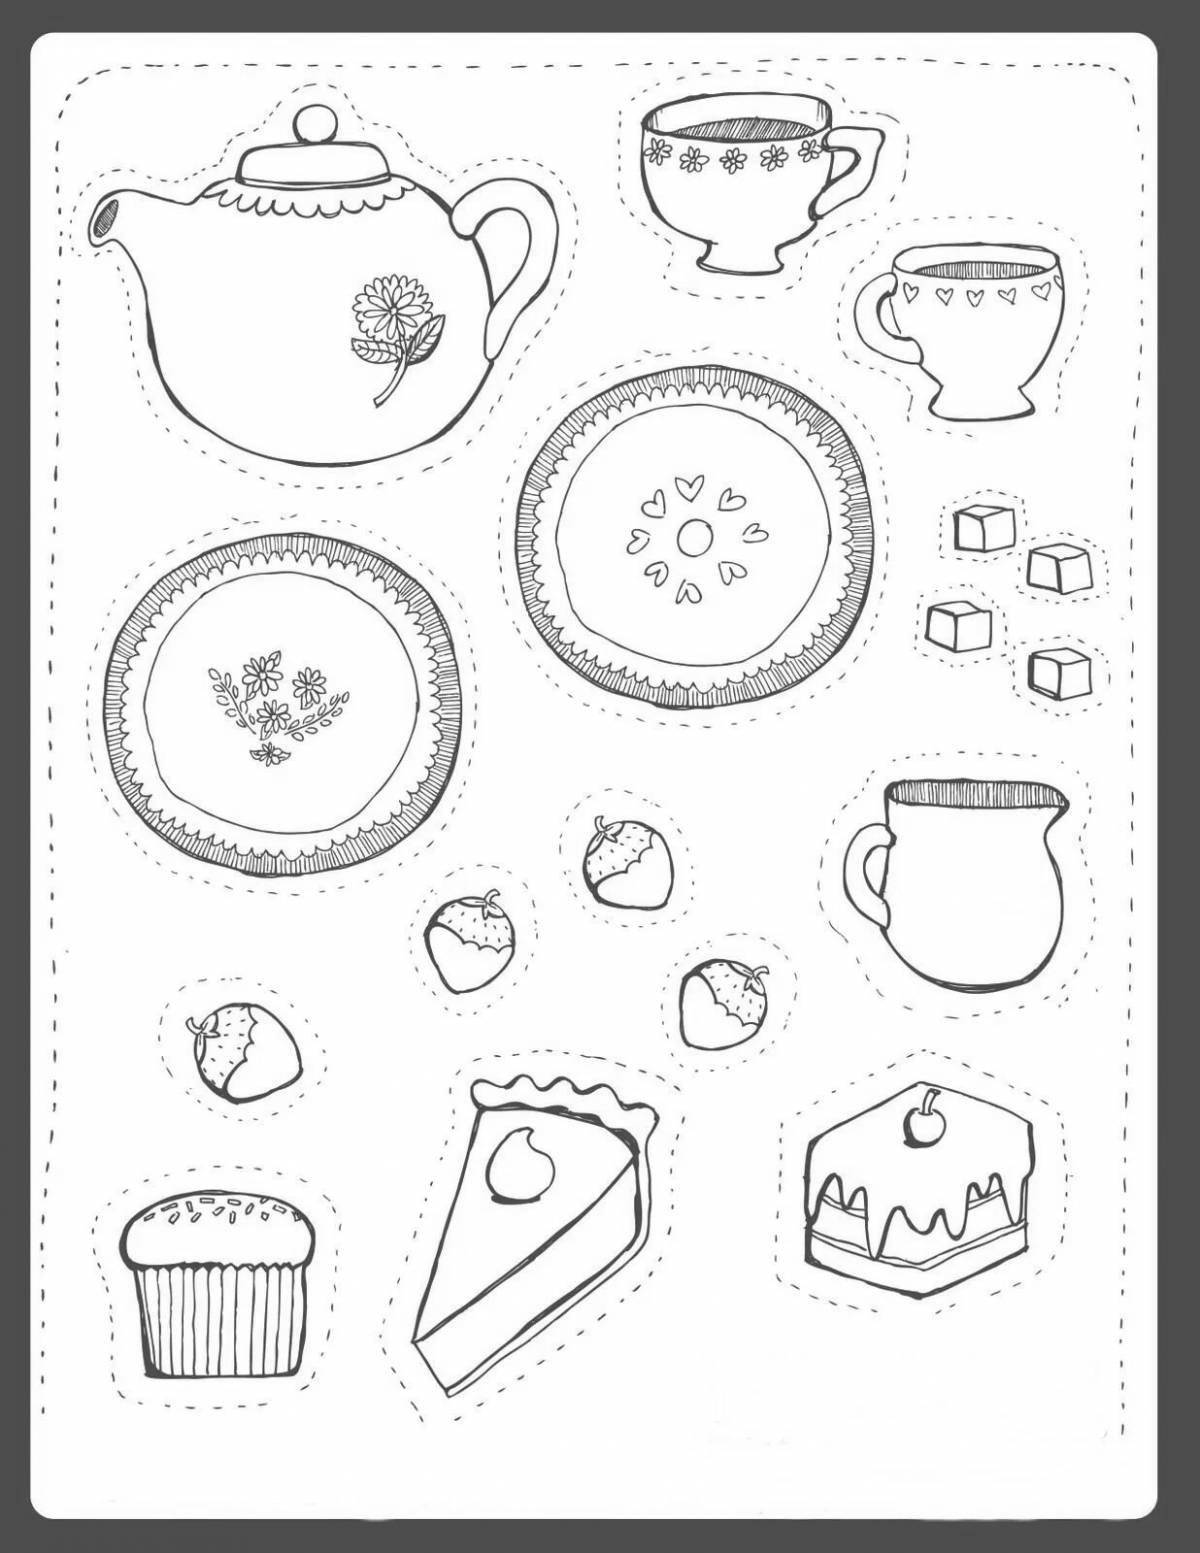 Coloring page for an exciting tea set